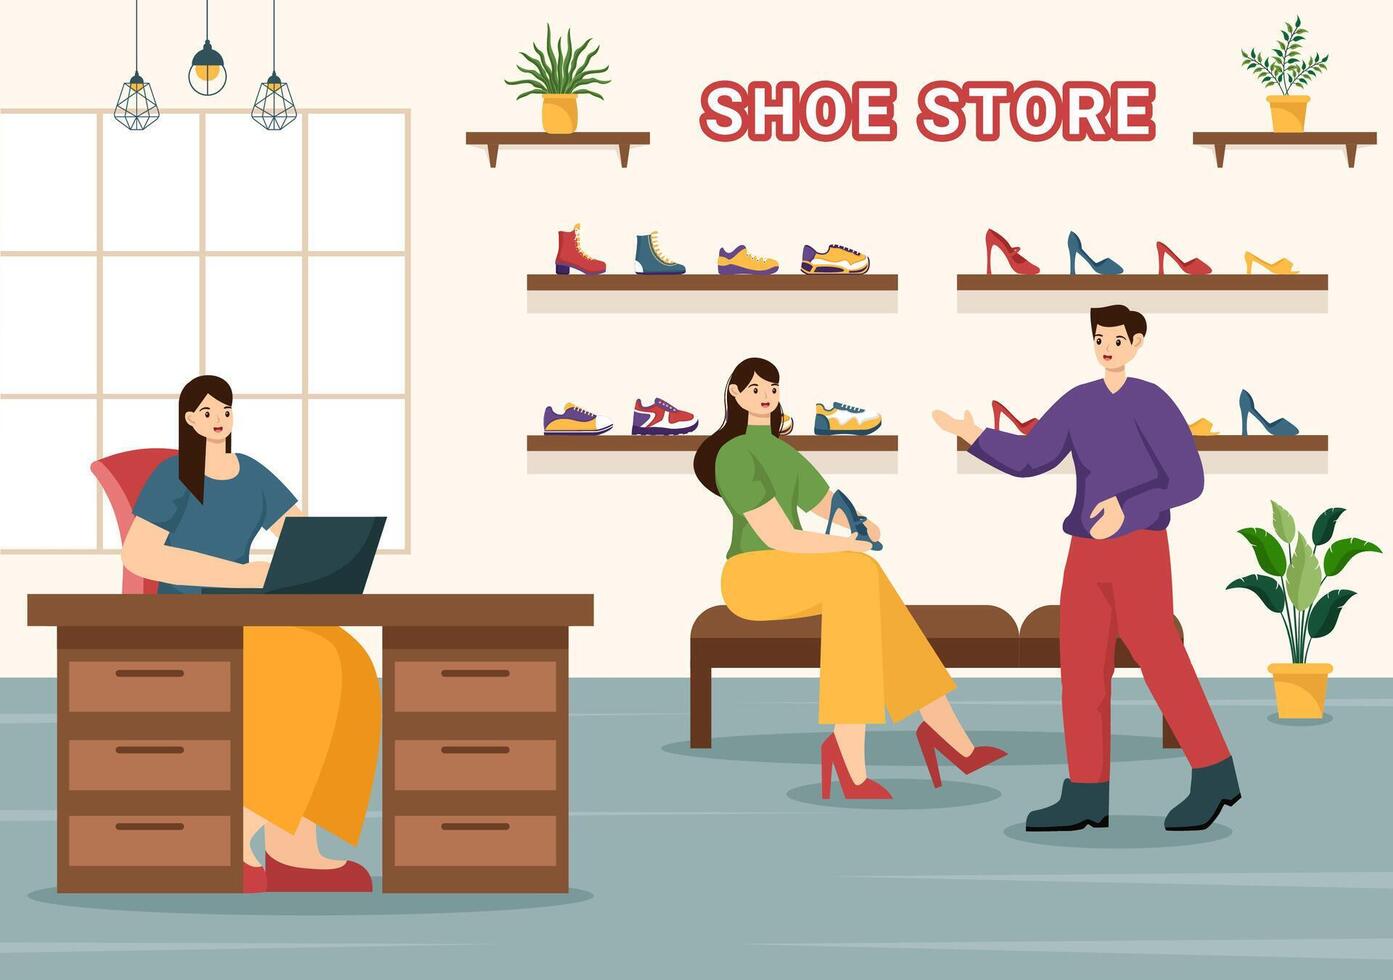 Shoe Store Vector Illustration with New Collection Men or Women Various Models or Colors of Sneakers and High Heels in Flat Cartoon Background